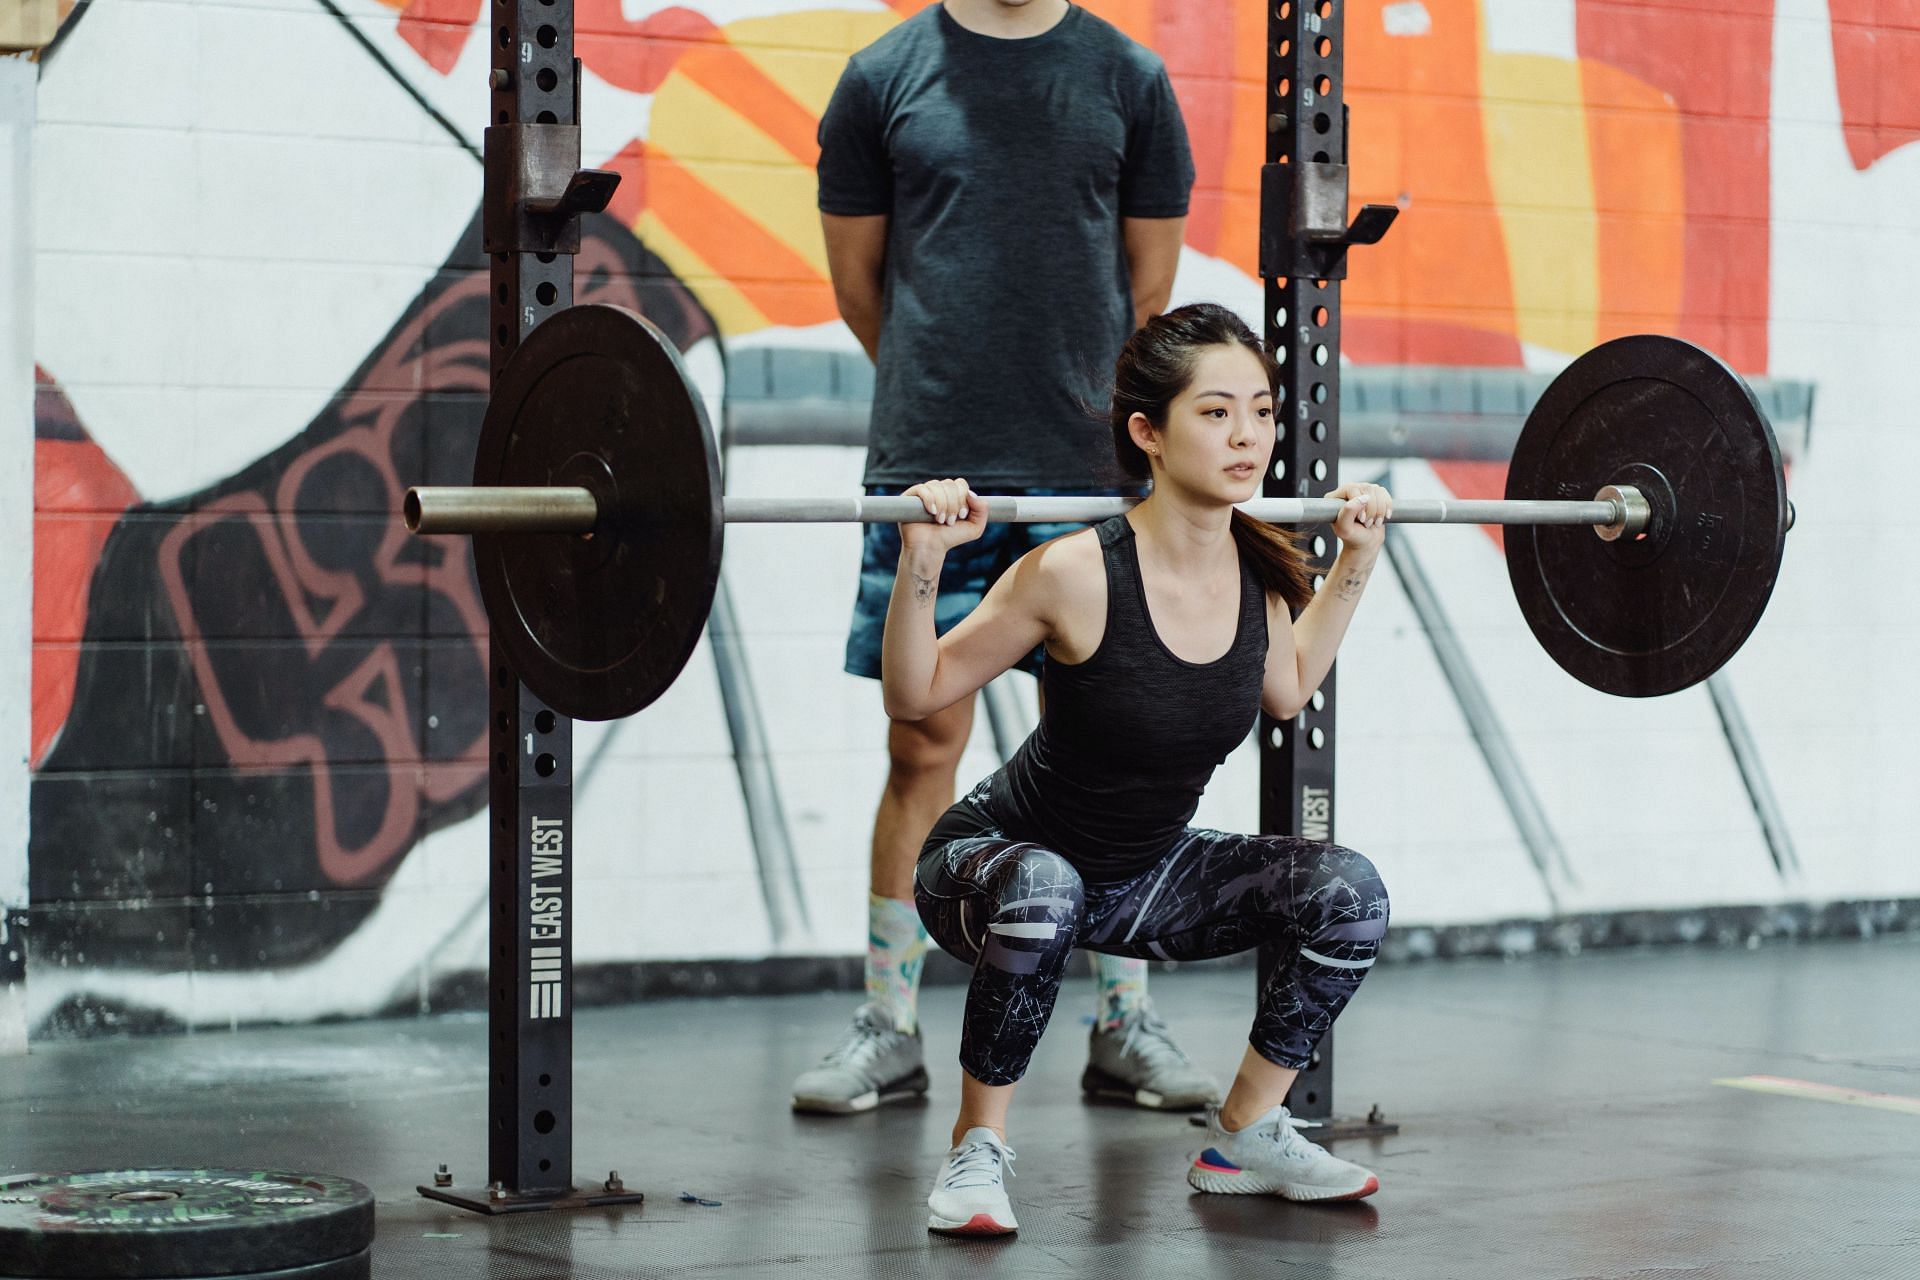 Deep squats are the most effective workout for burning fat in the thighs and hips (Image via Pexels/Ketut Subiyanto)